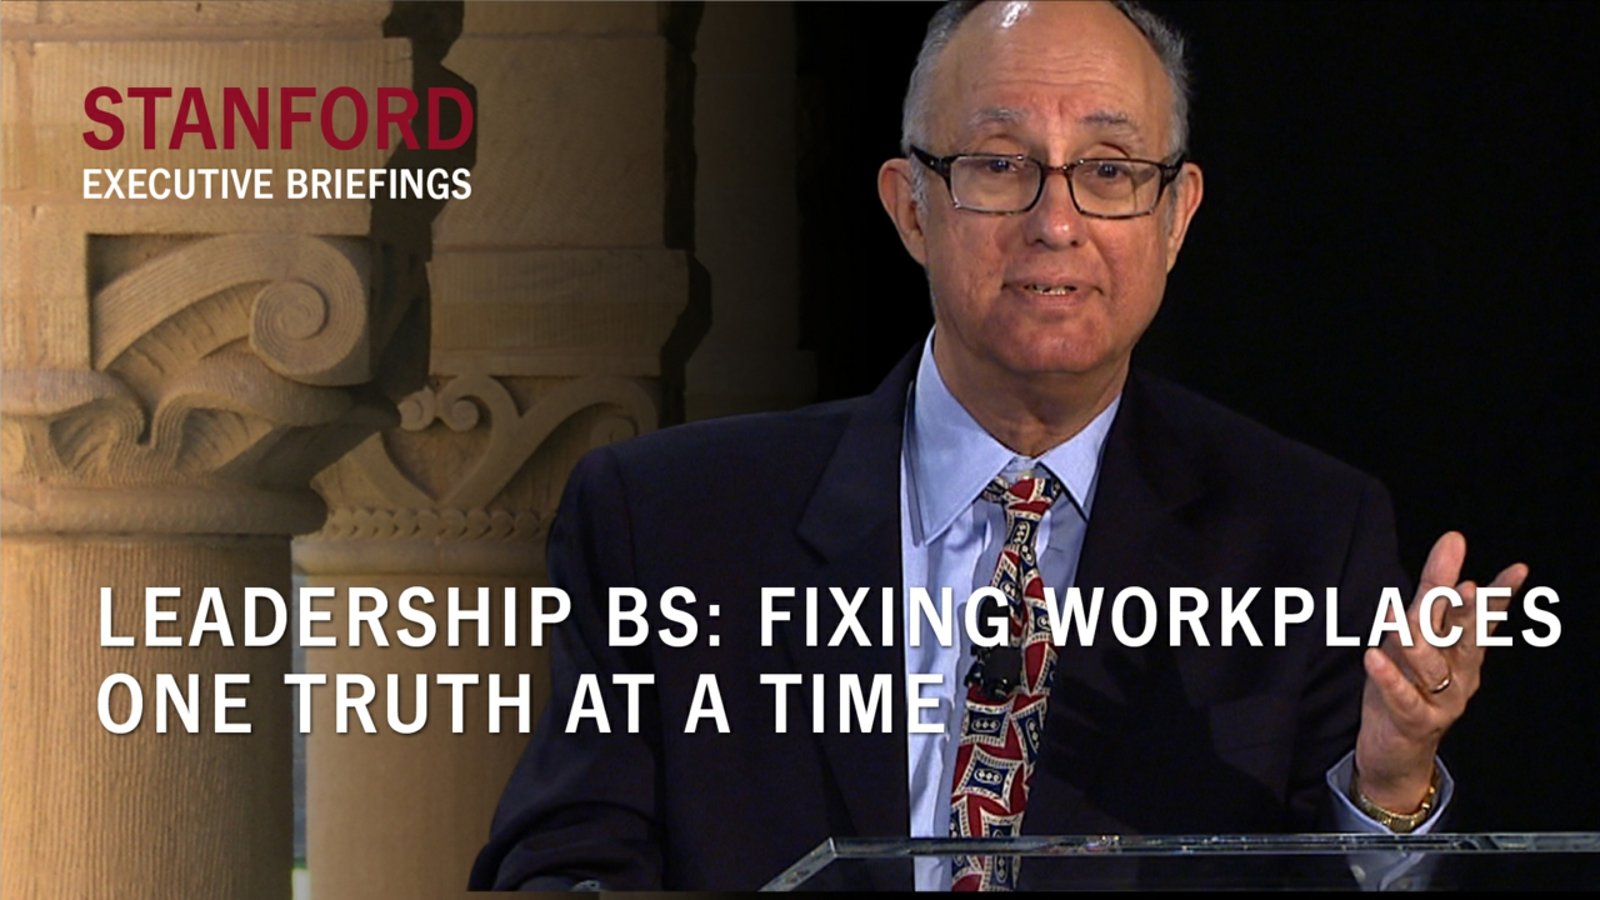 Leadership BS - Fixing Workplaces One Truth at a Time